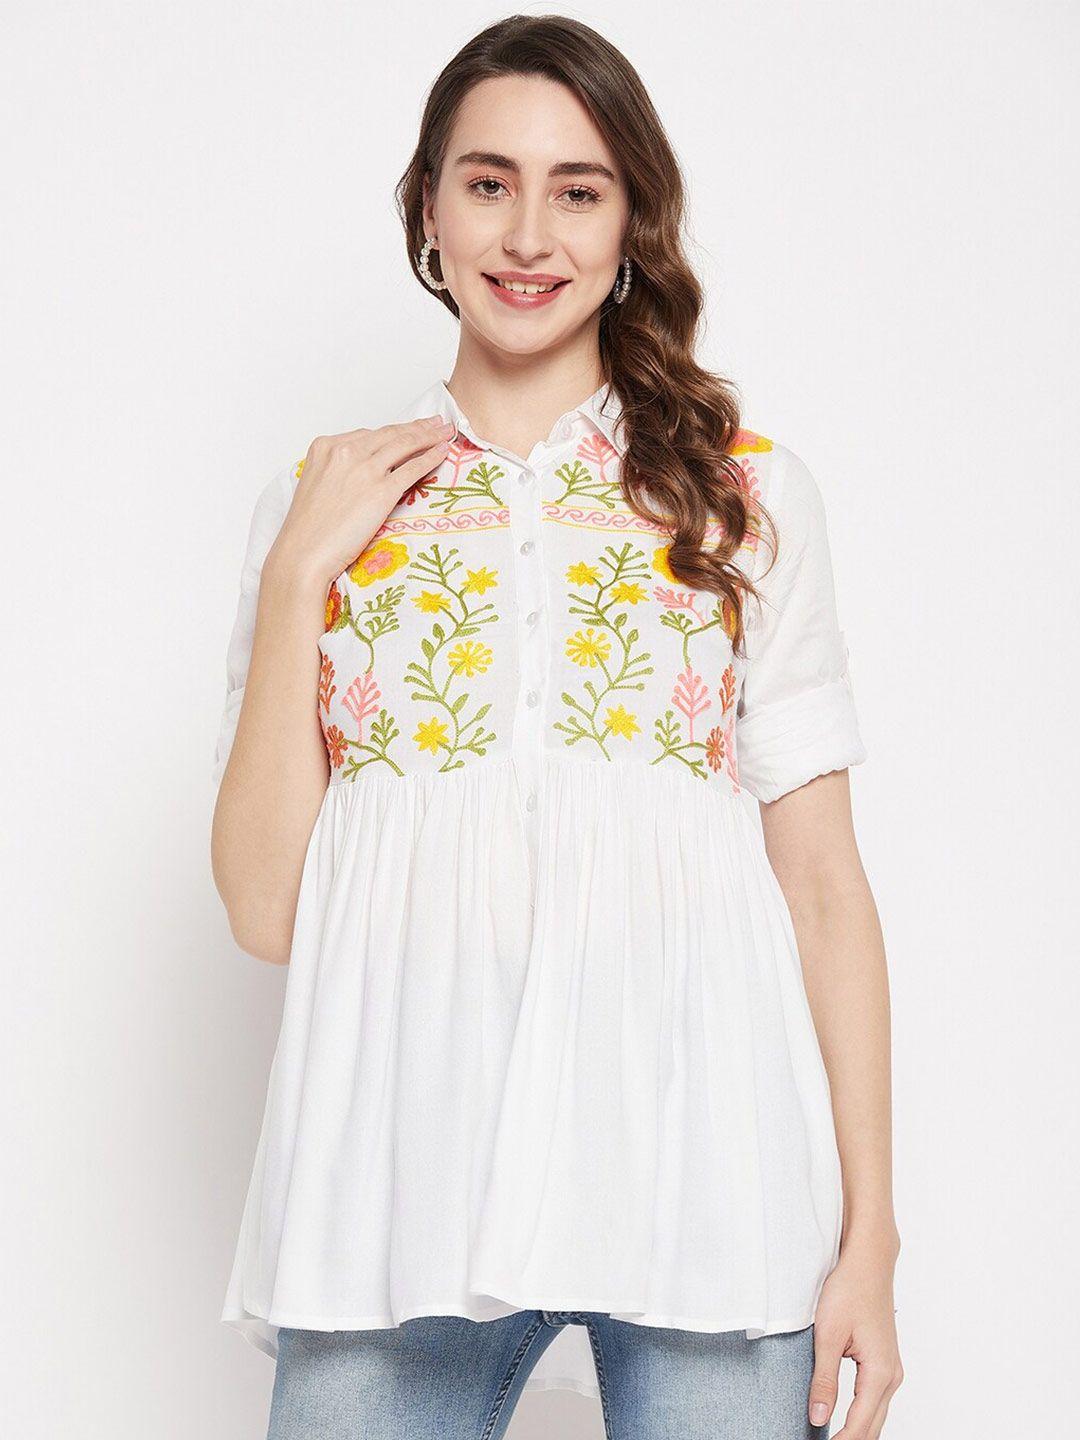 ruhaans floral embroidered roll-up sleeves shirt style top